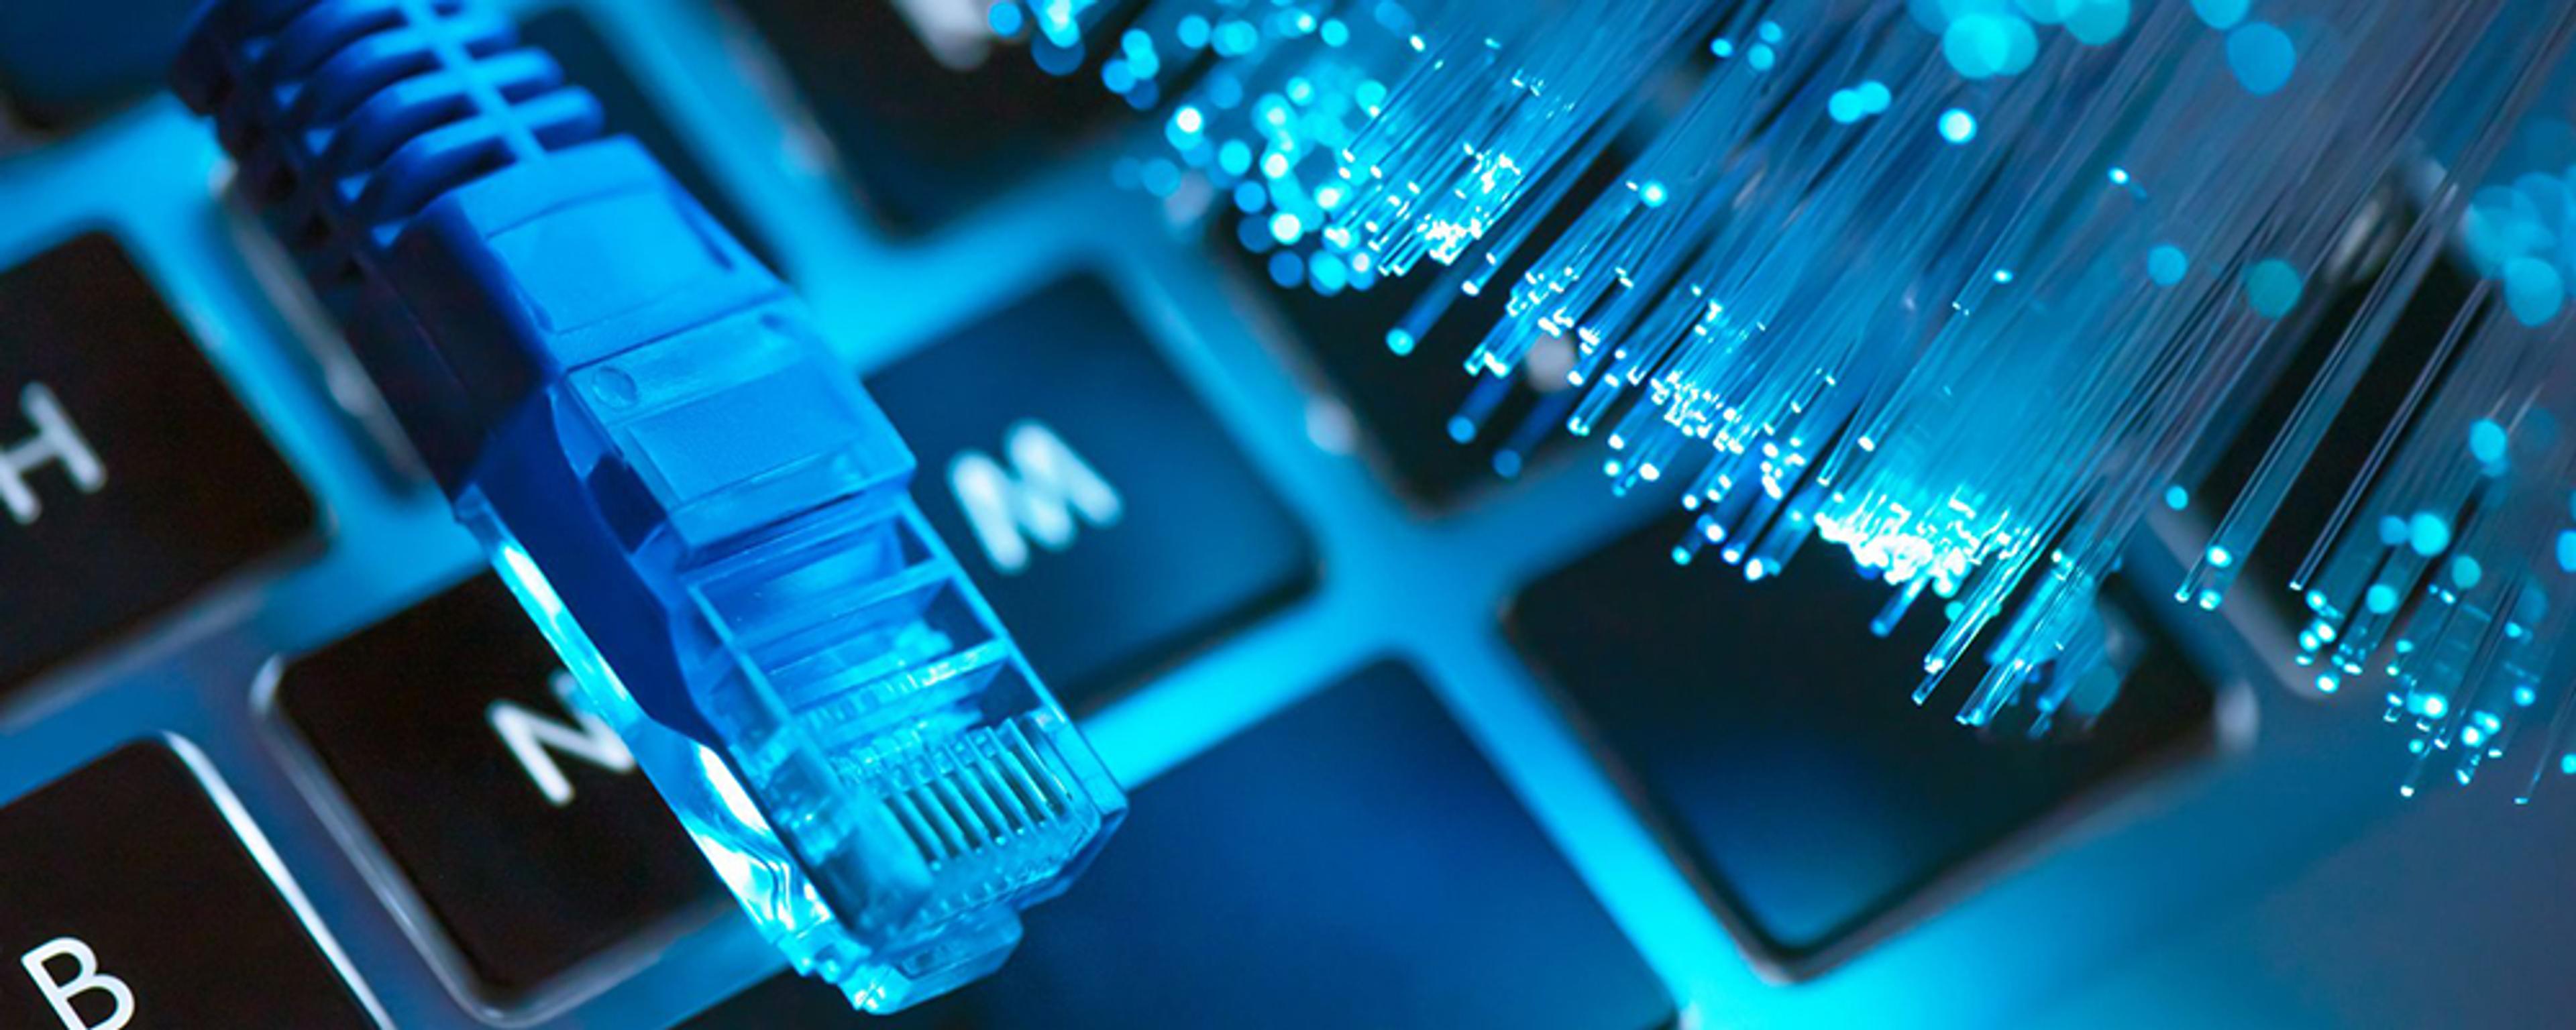 BEAD Report: Grading States’ Initial Proposals for Federal Broadband Funds